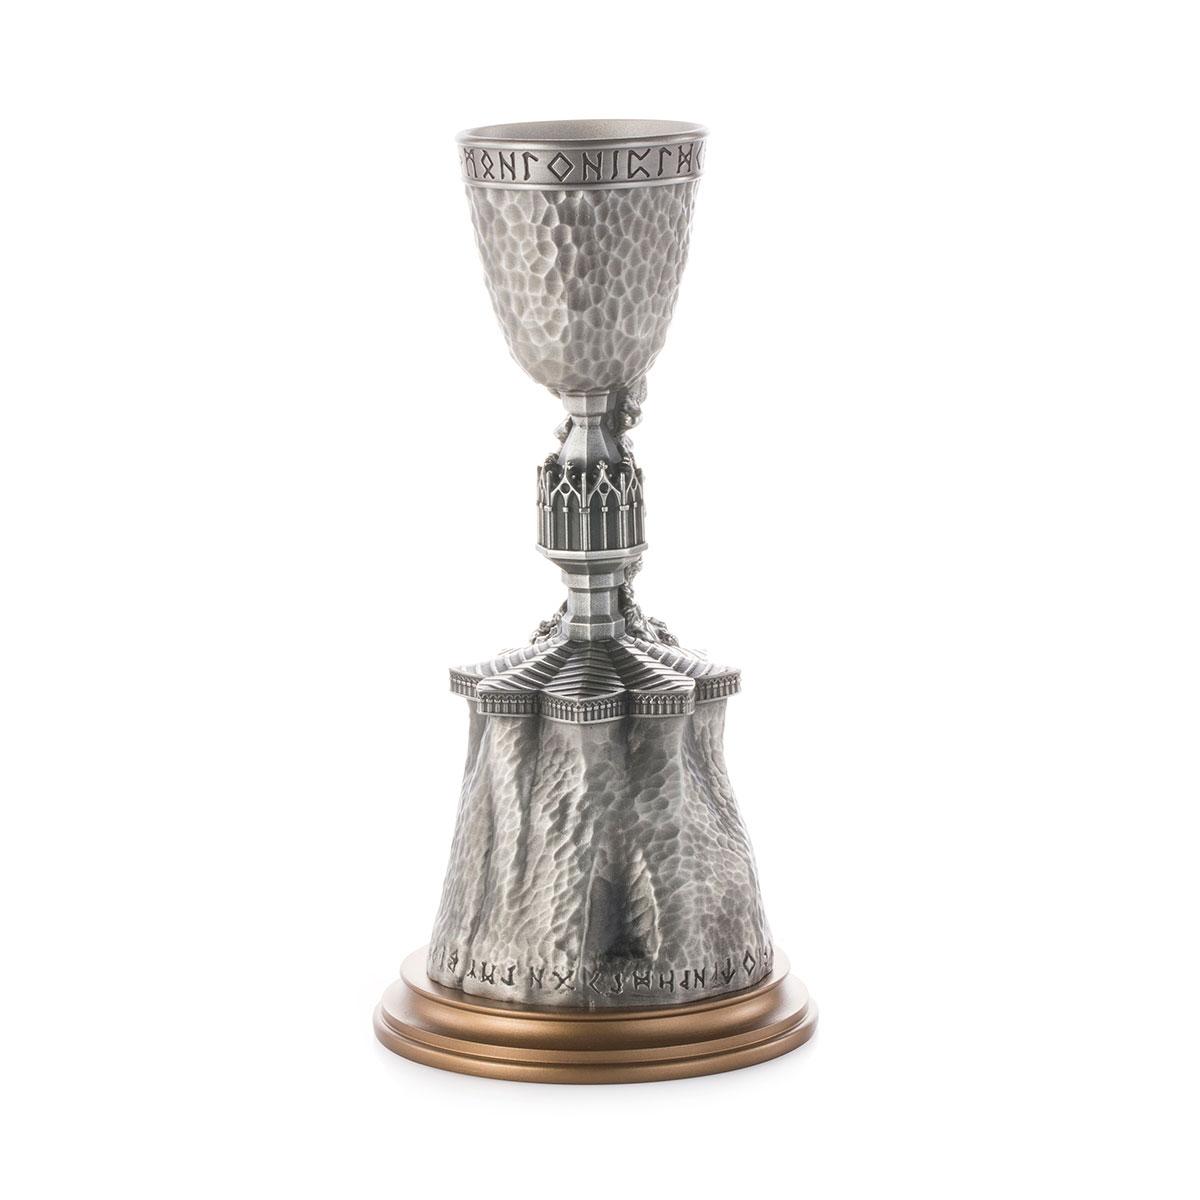 Limited Edition Goblet of Fire Replica